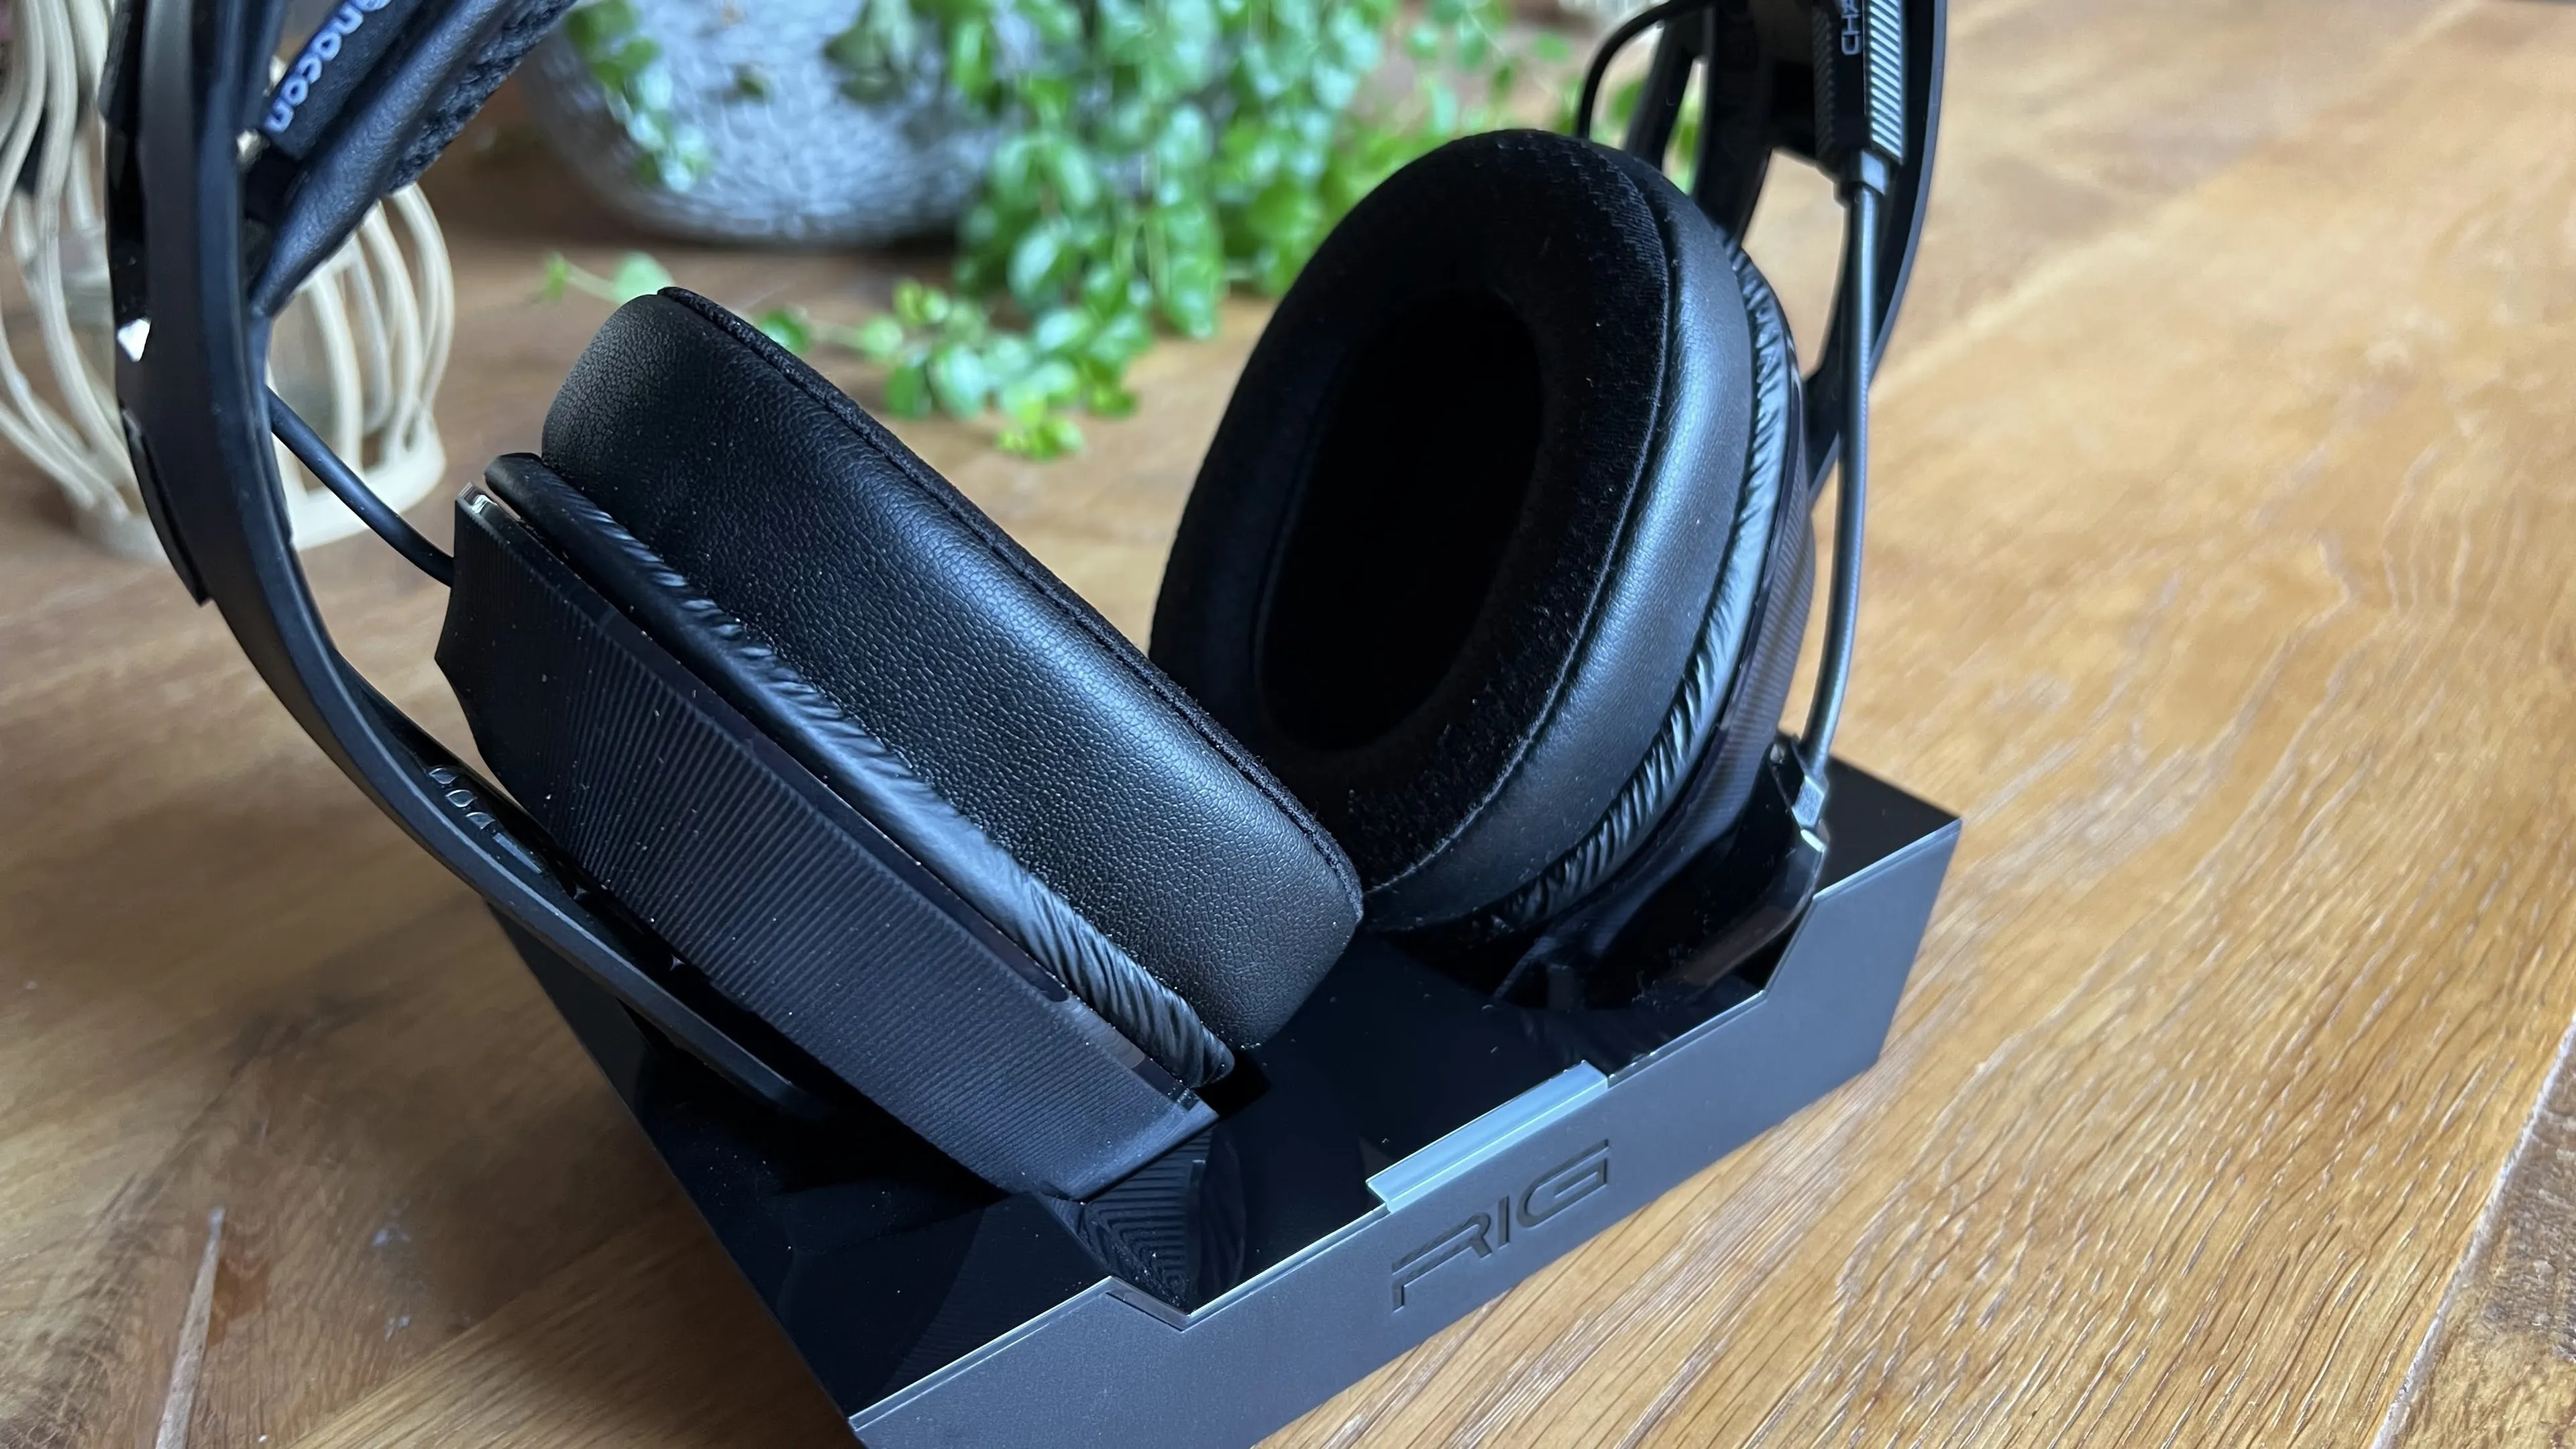 rig 800 pro hs headset review 3f1664550286